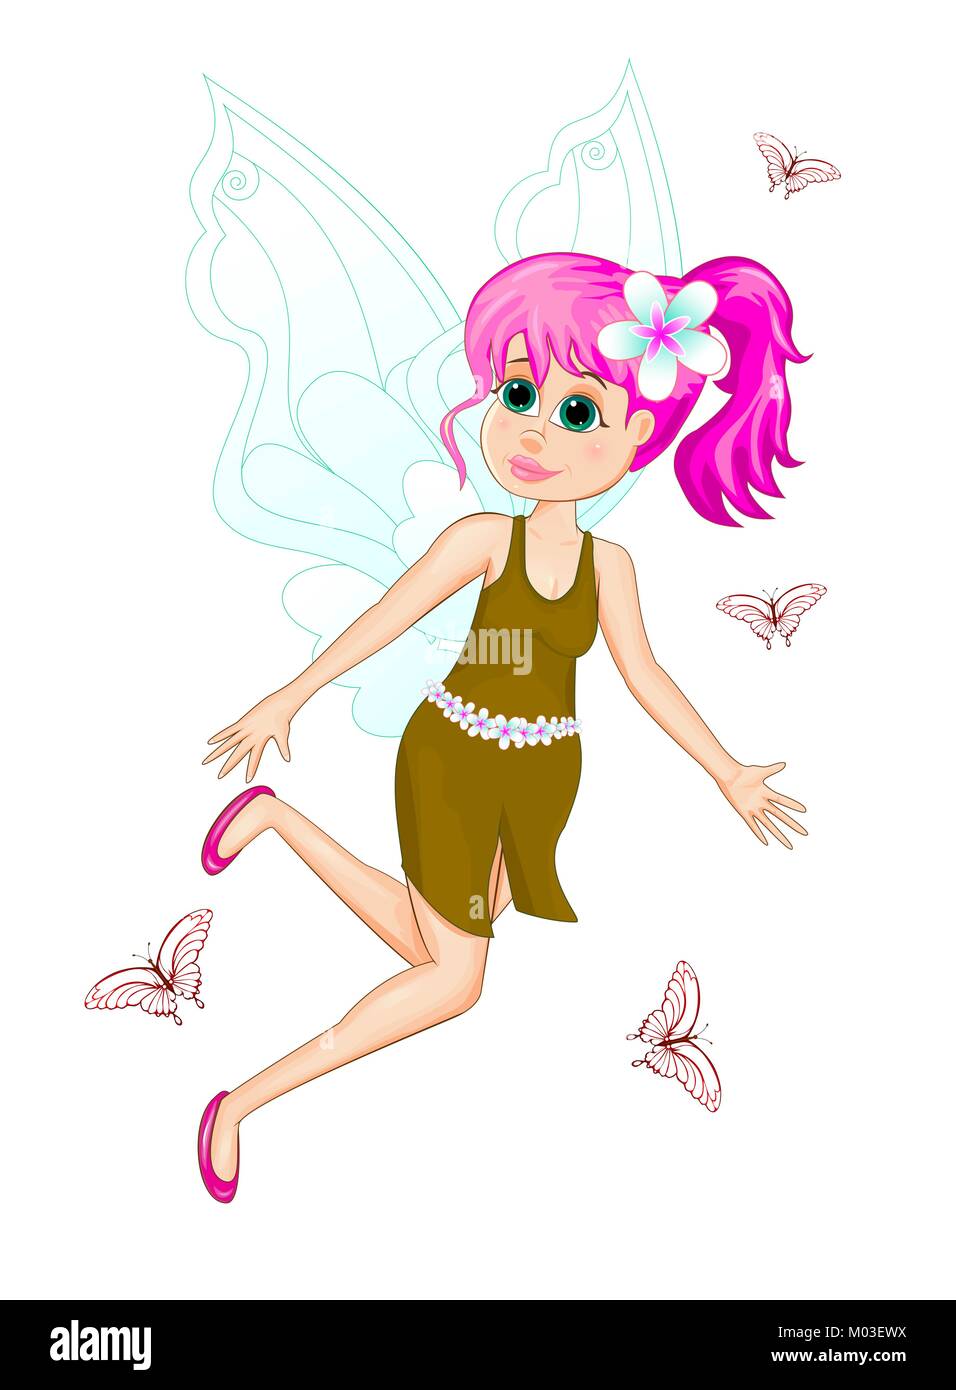 Fairy with pink hair. Cartoon fairy in dress and with flower in hair on white background. Flying fairy and butterflies. Stock Vector